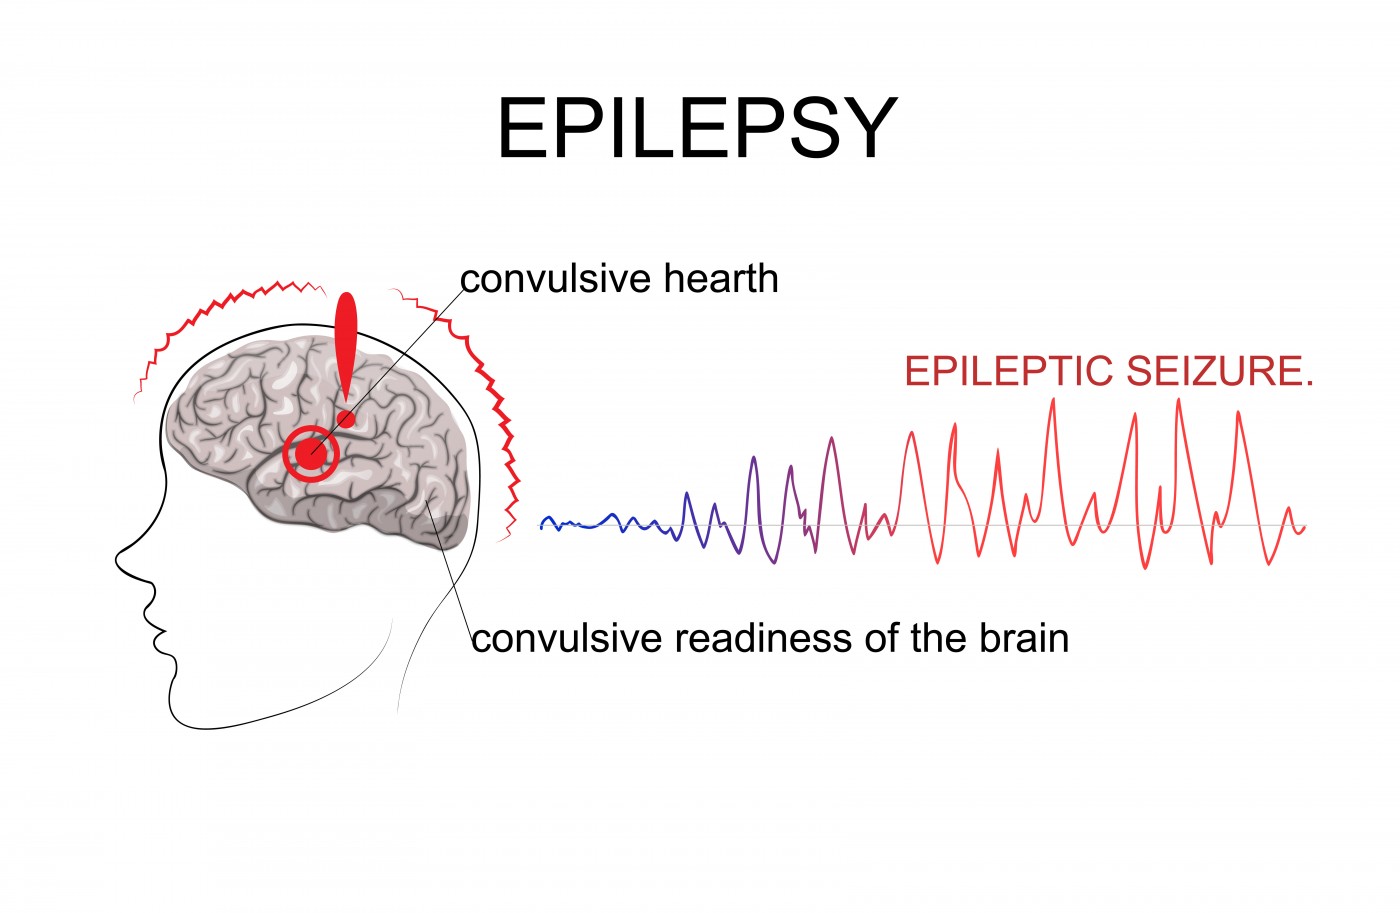 algorithm-works-to-predict-an-epileptic-seizure-20-minutes-before-it